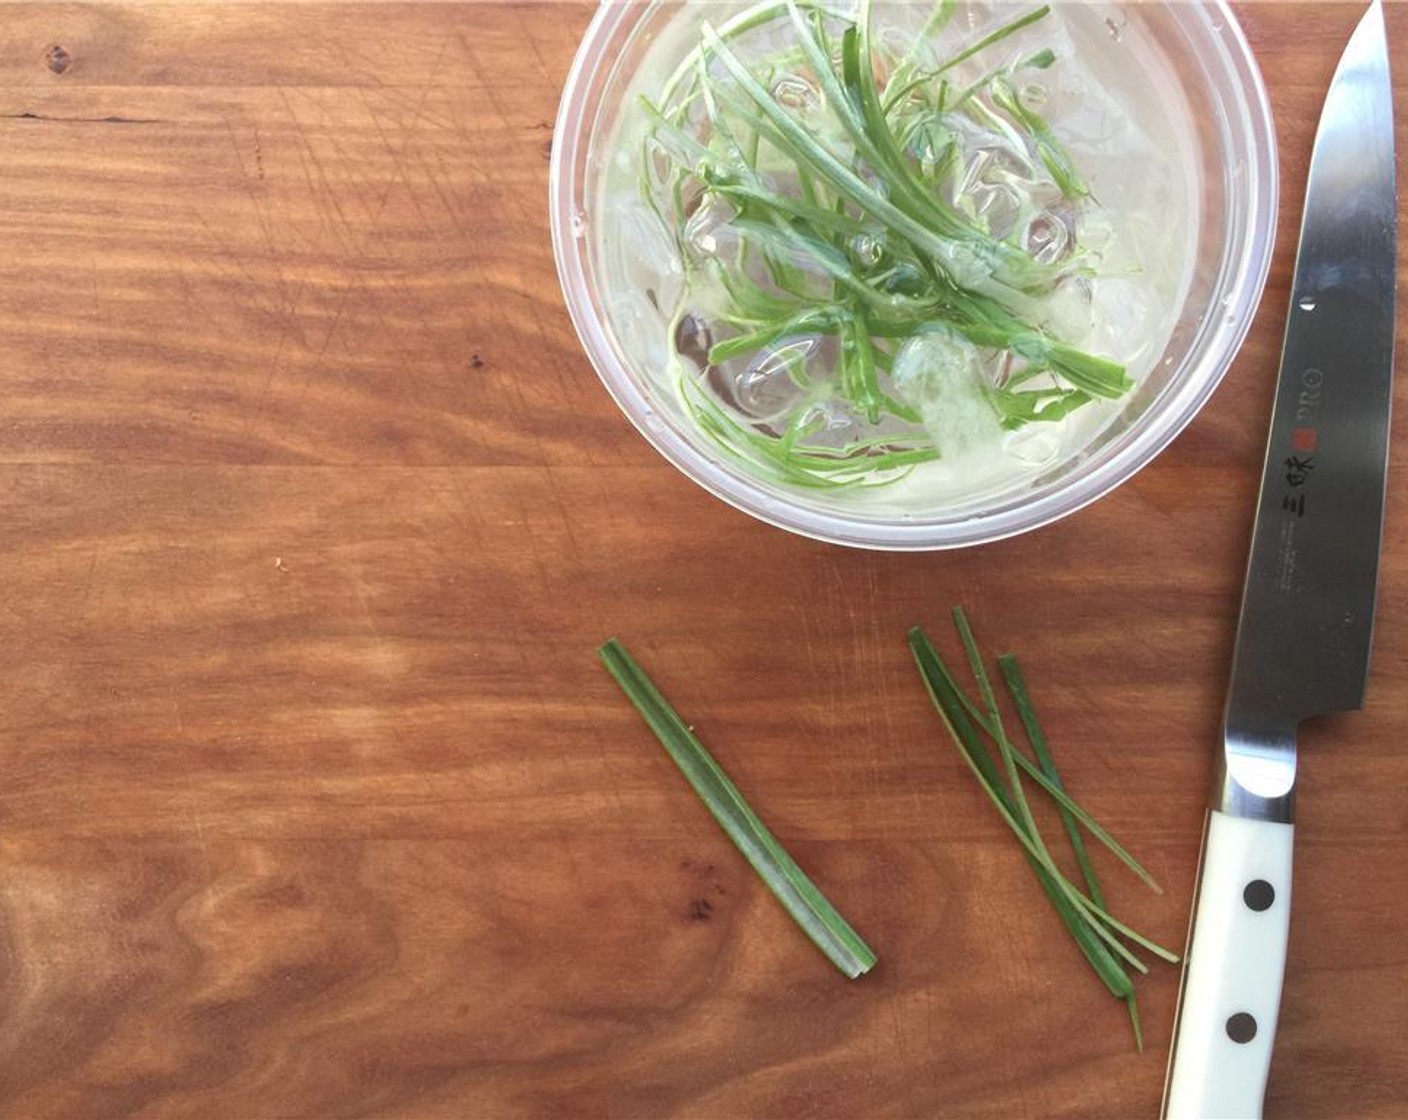 step 16 For the garnish, slice 2-inch segments off the green ends of the Scallions. Vertically slice into long, thin slices. Place in a small bowl of ice water, so they curl up. Set aside.